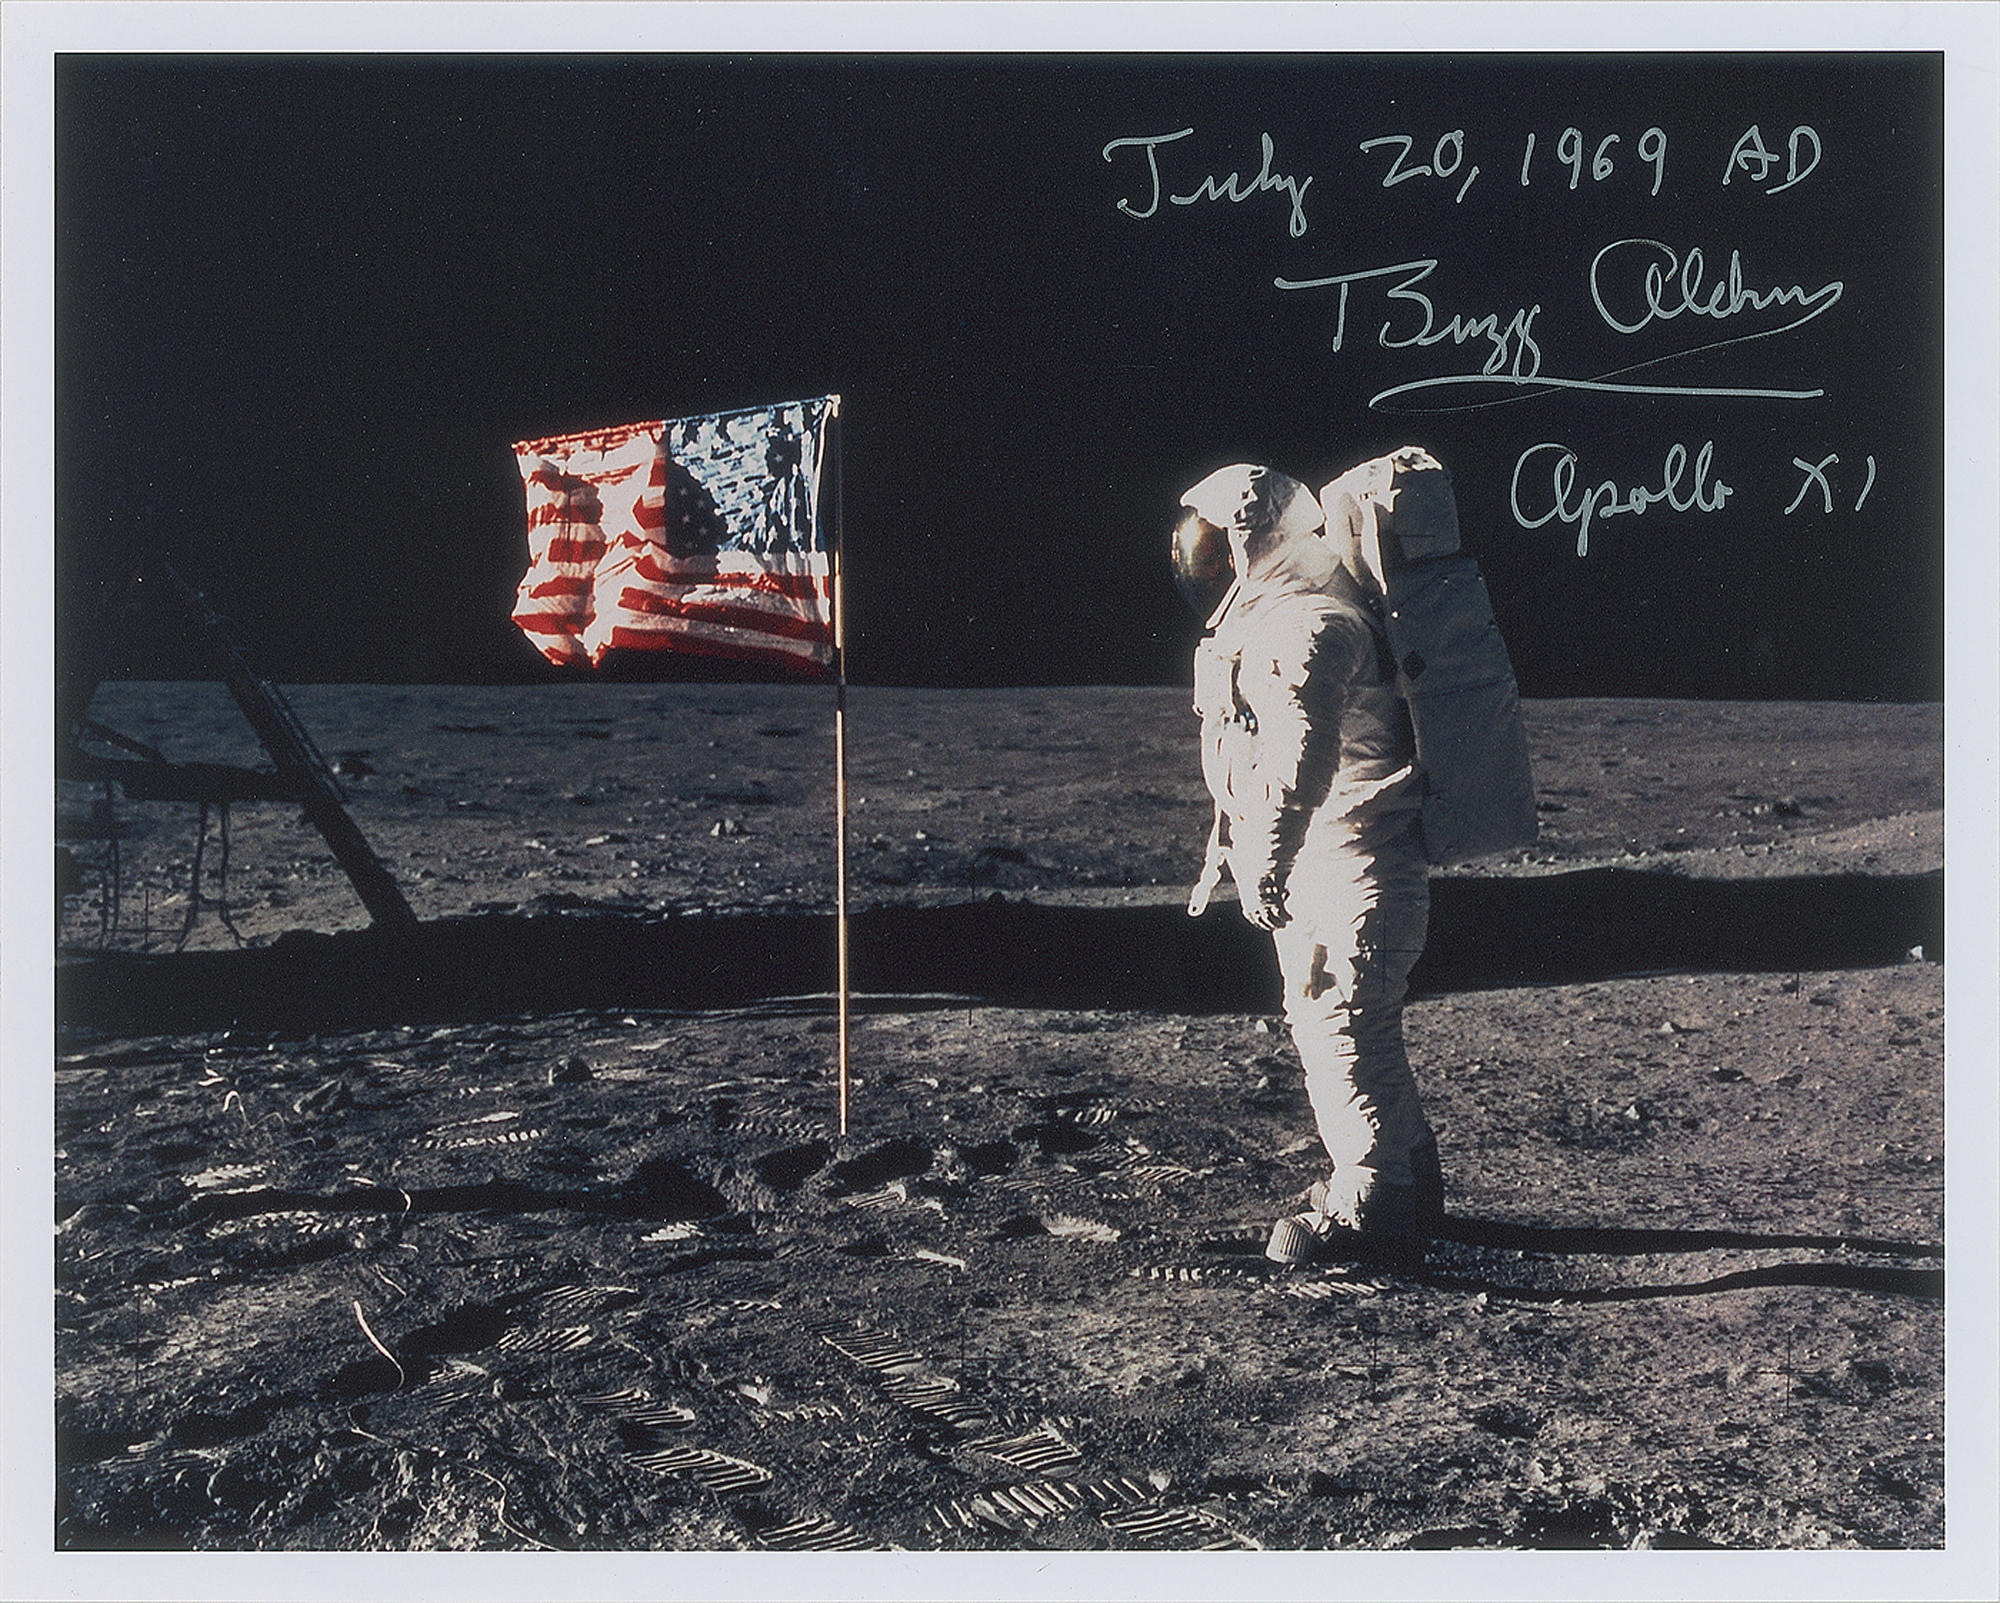 Lot #380 Buzz Aldrin Signed Photograph